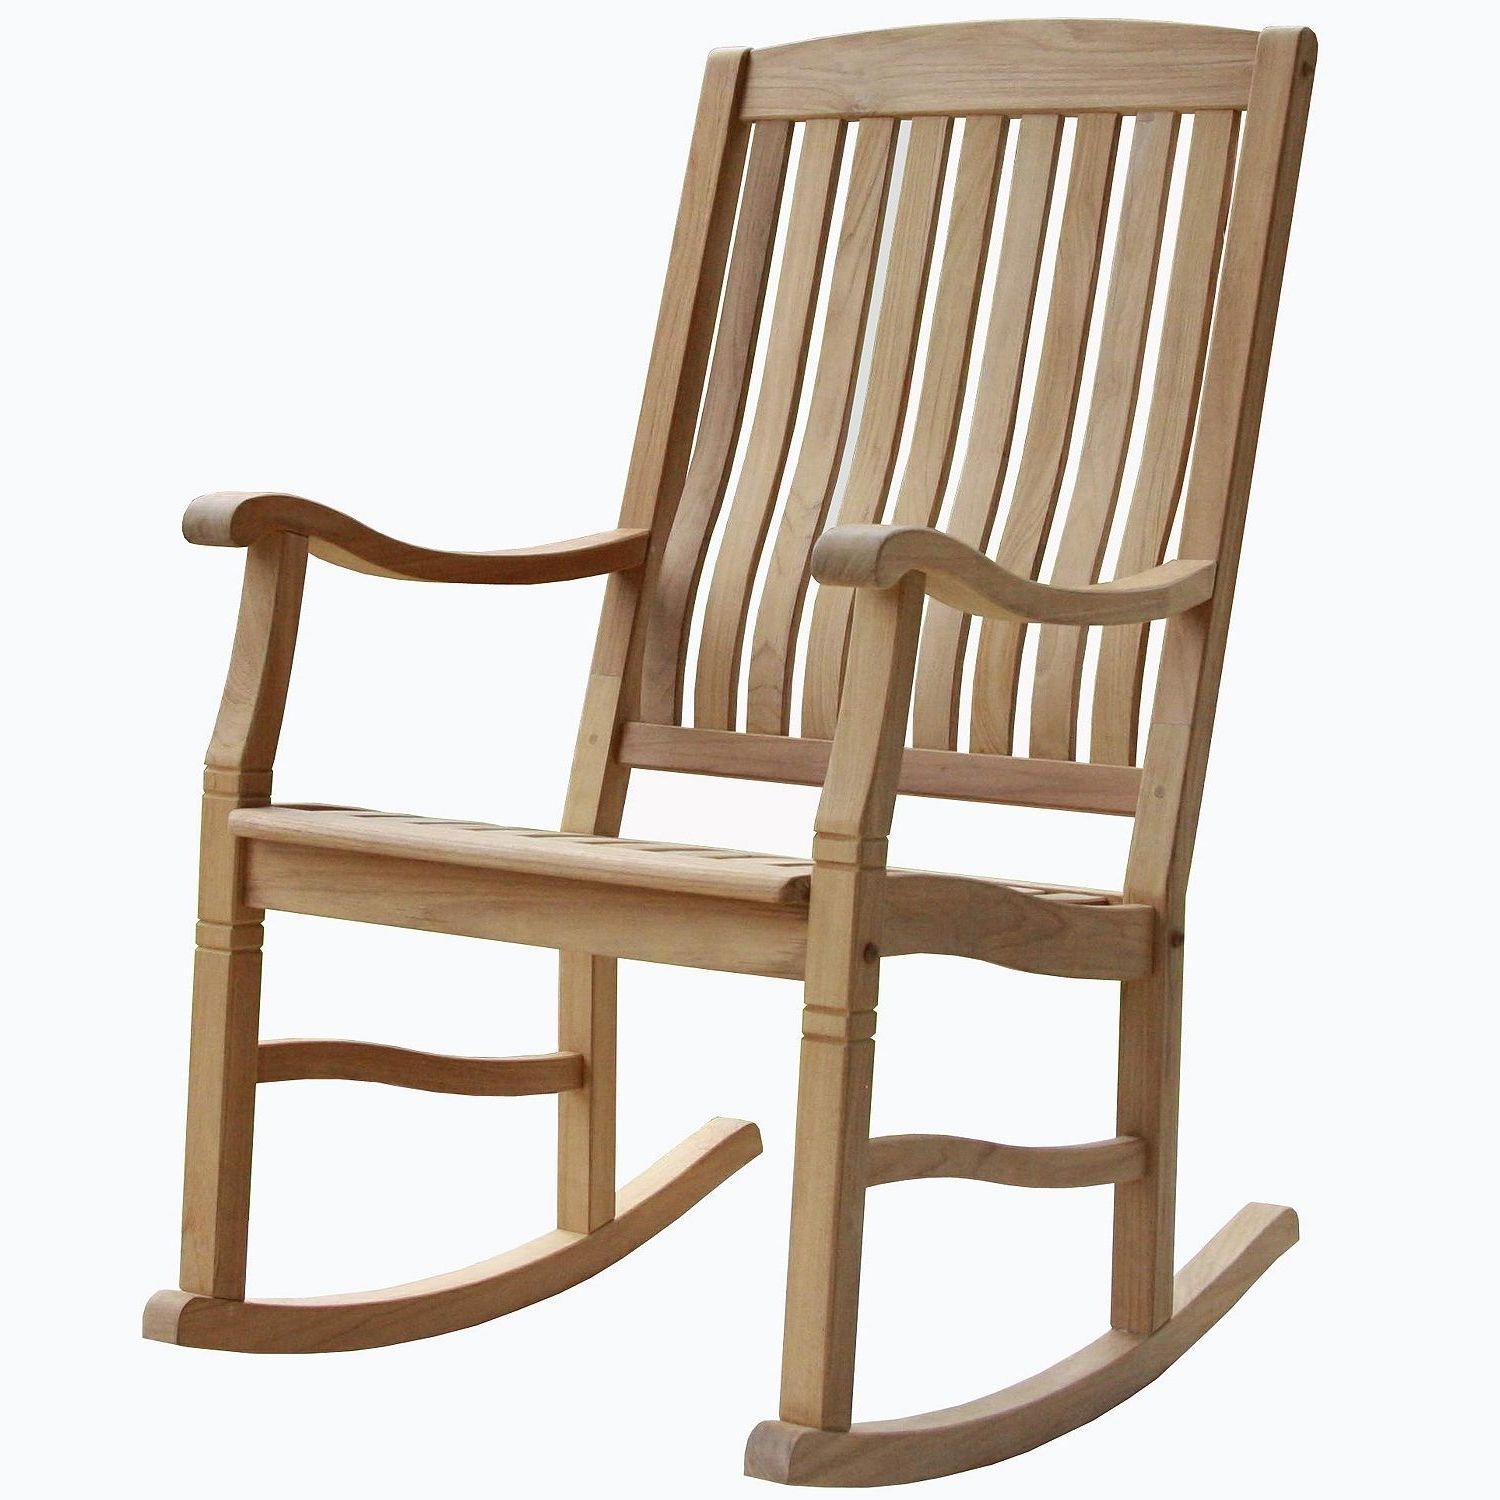 Widely Used Rocking Chairs At Sam\'s Club Intended For Teak Rocking Chair – Sam's Club–these Are The Ones We Have In N (View 8 of 15)